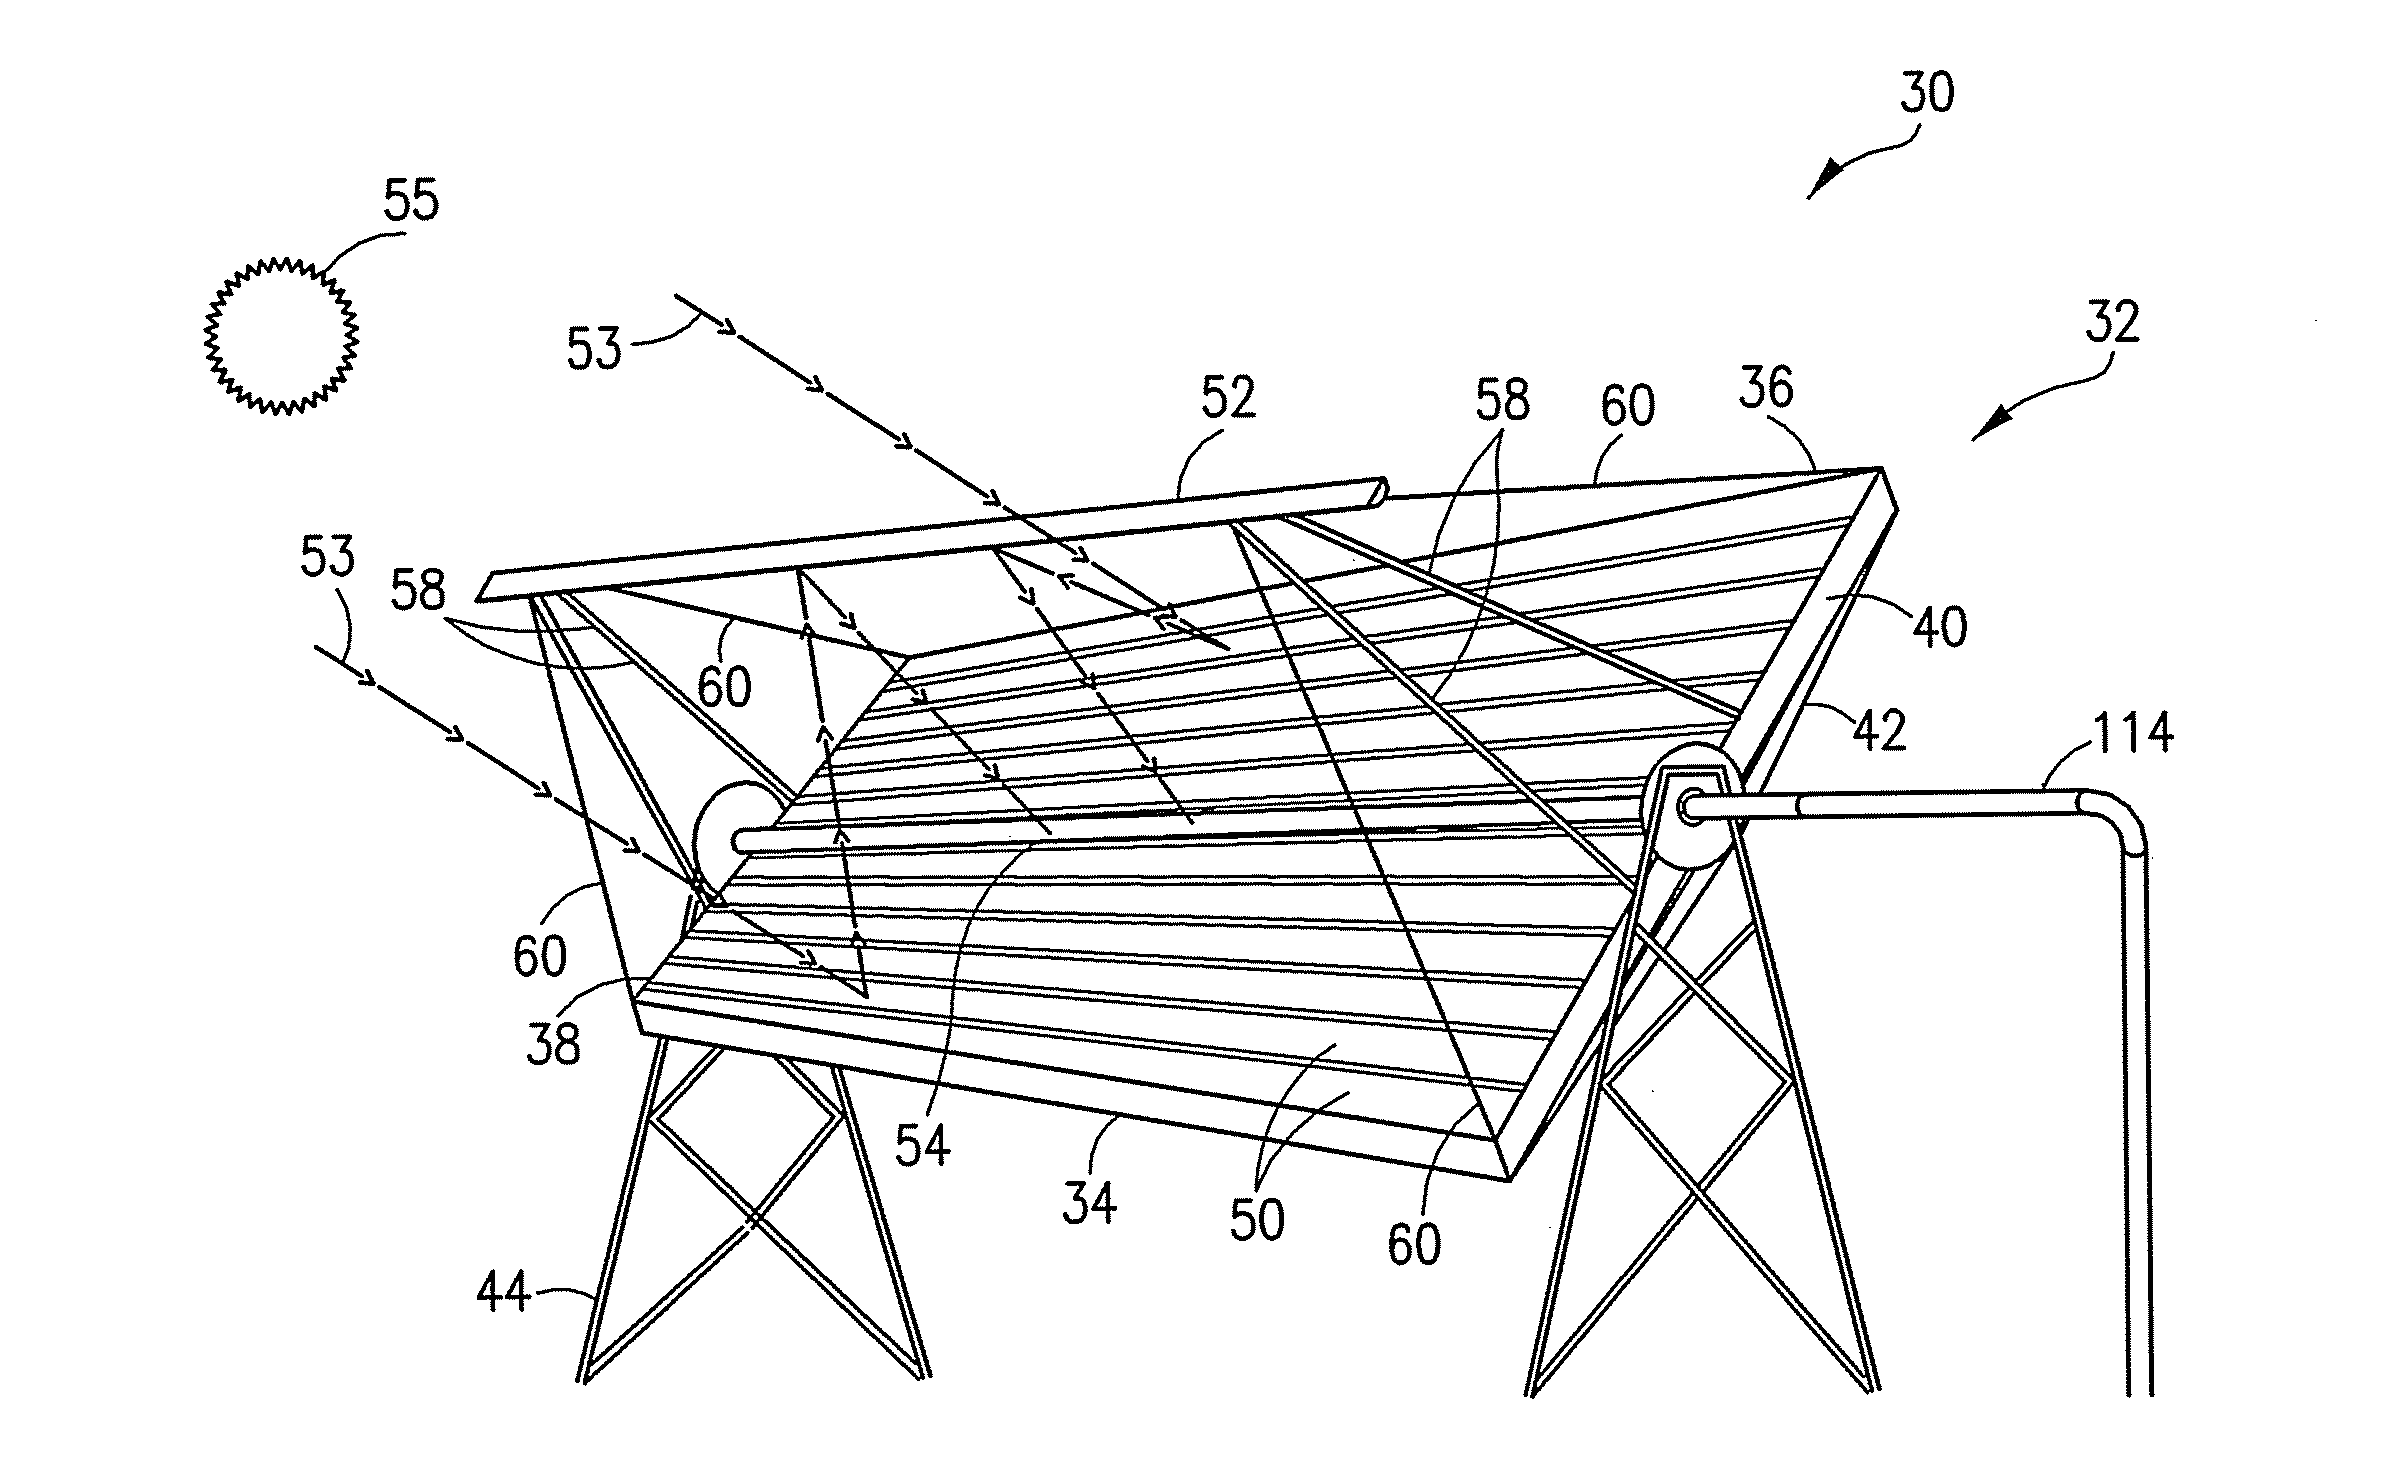 Linear solar energy collection system with secondary and tertiary reflectors